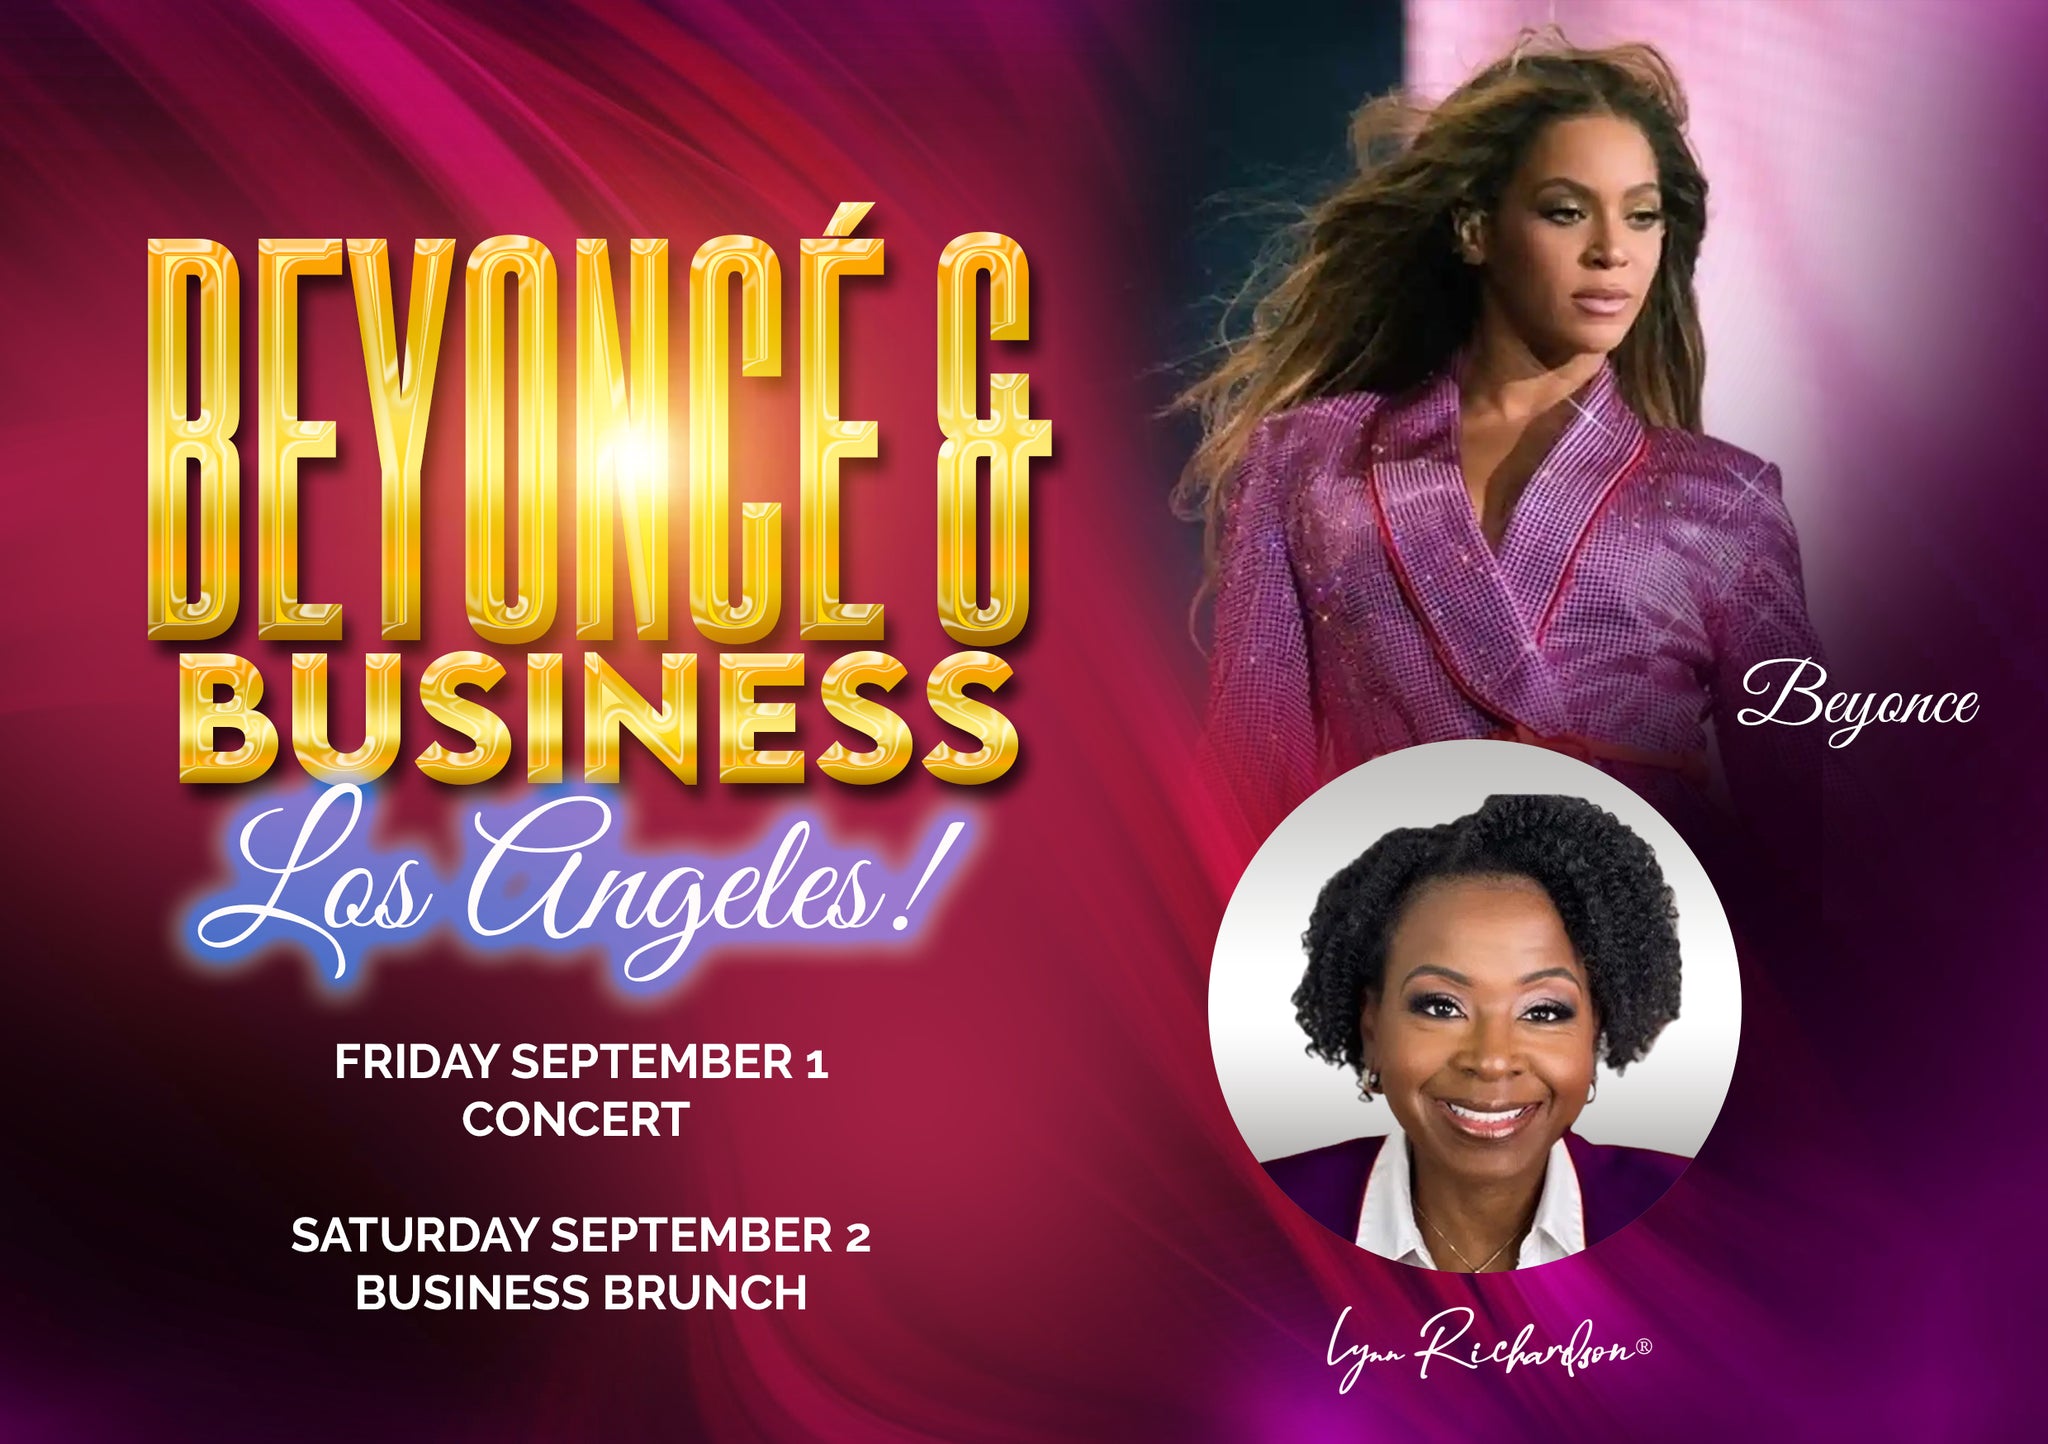 Beyonce and Business Los Angeles